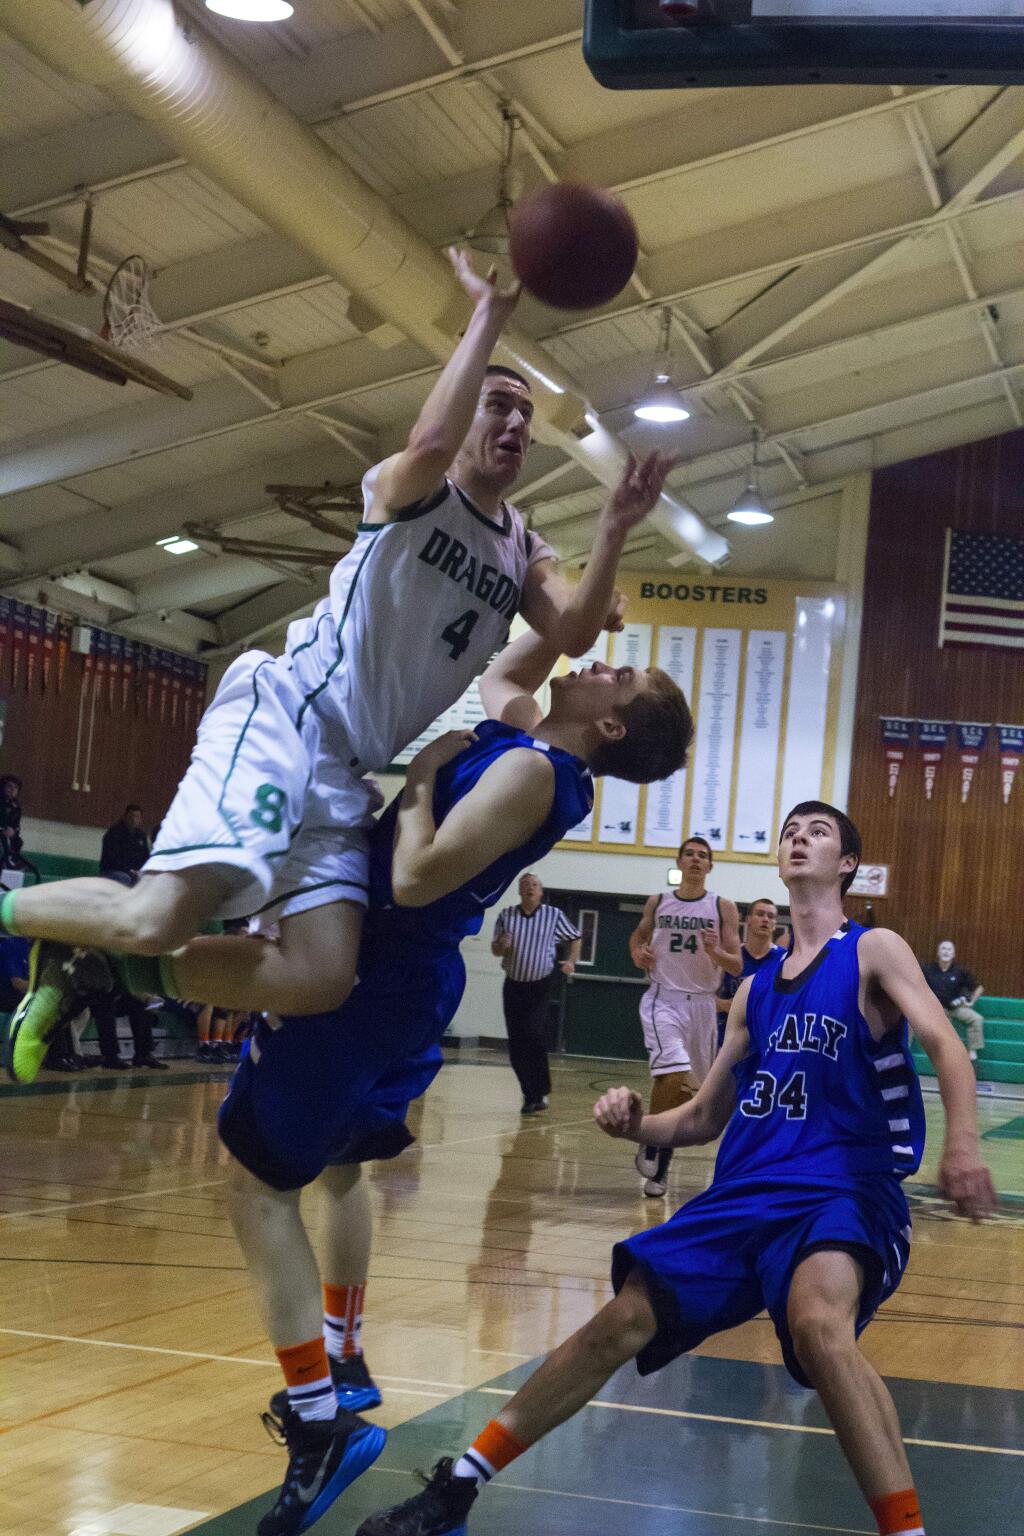 Sonoma's Ryan Fisher powers his way to the basket as teammate Ryan Wilbanks (back, No. 24) follows the play during the Dragons' SCL-opening loss to defending champion, Analy, on Wednesday night, 7 Jan, in Pfeiffer Gym. (Photos by Robbi Pengelly/Index-Tribune)